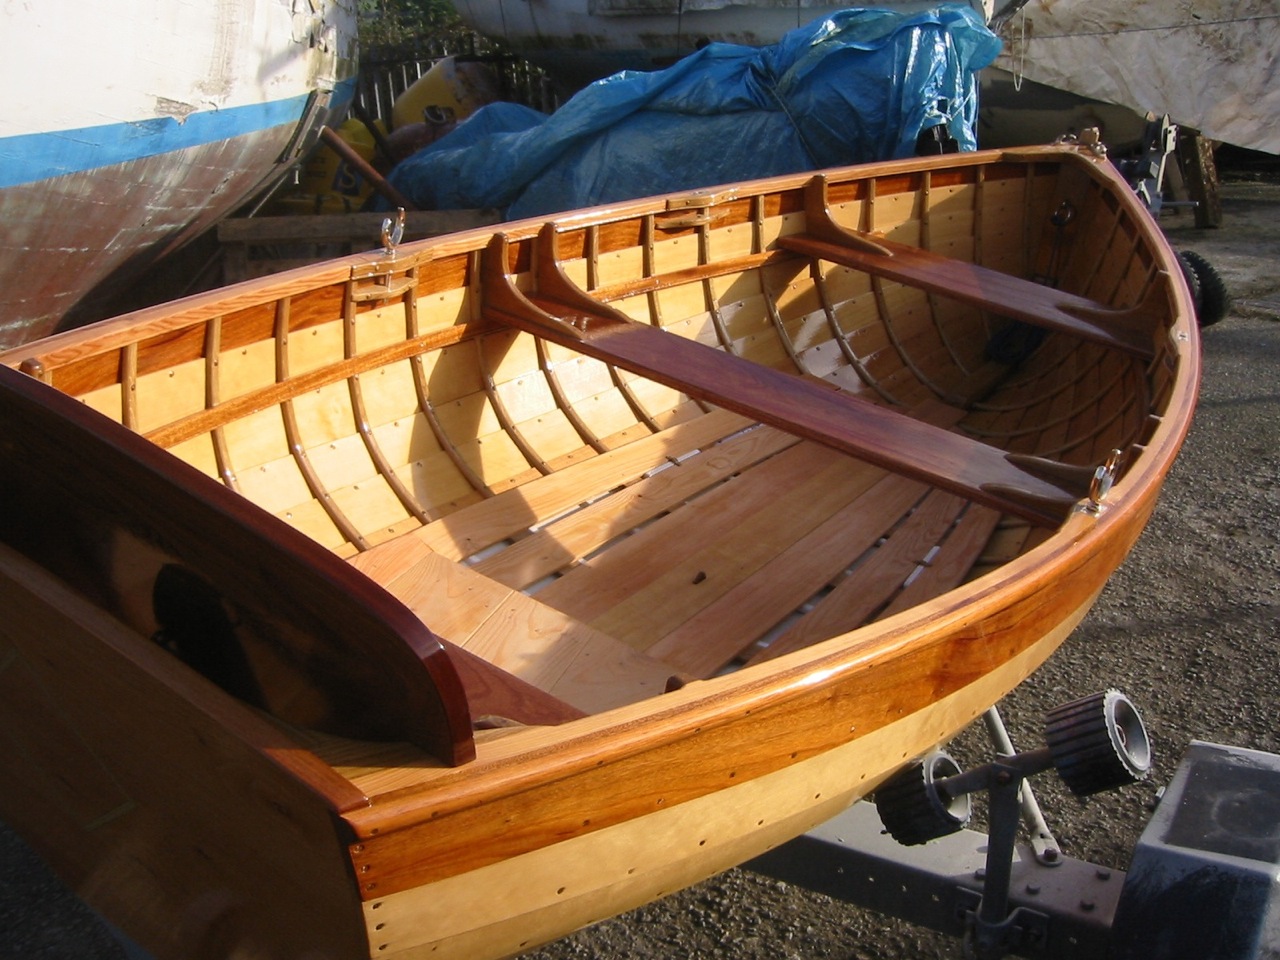 Fowey boat builder Marcus Lewis has this newly built 11ft clinker 